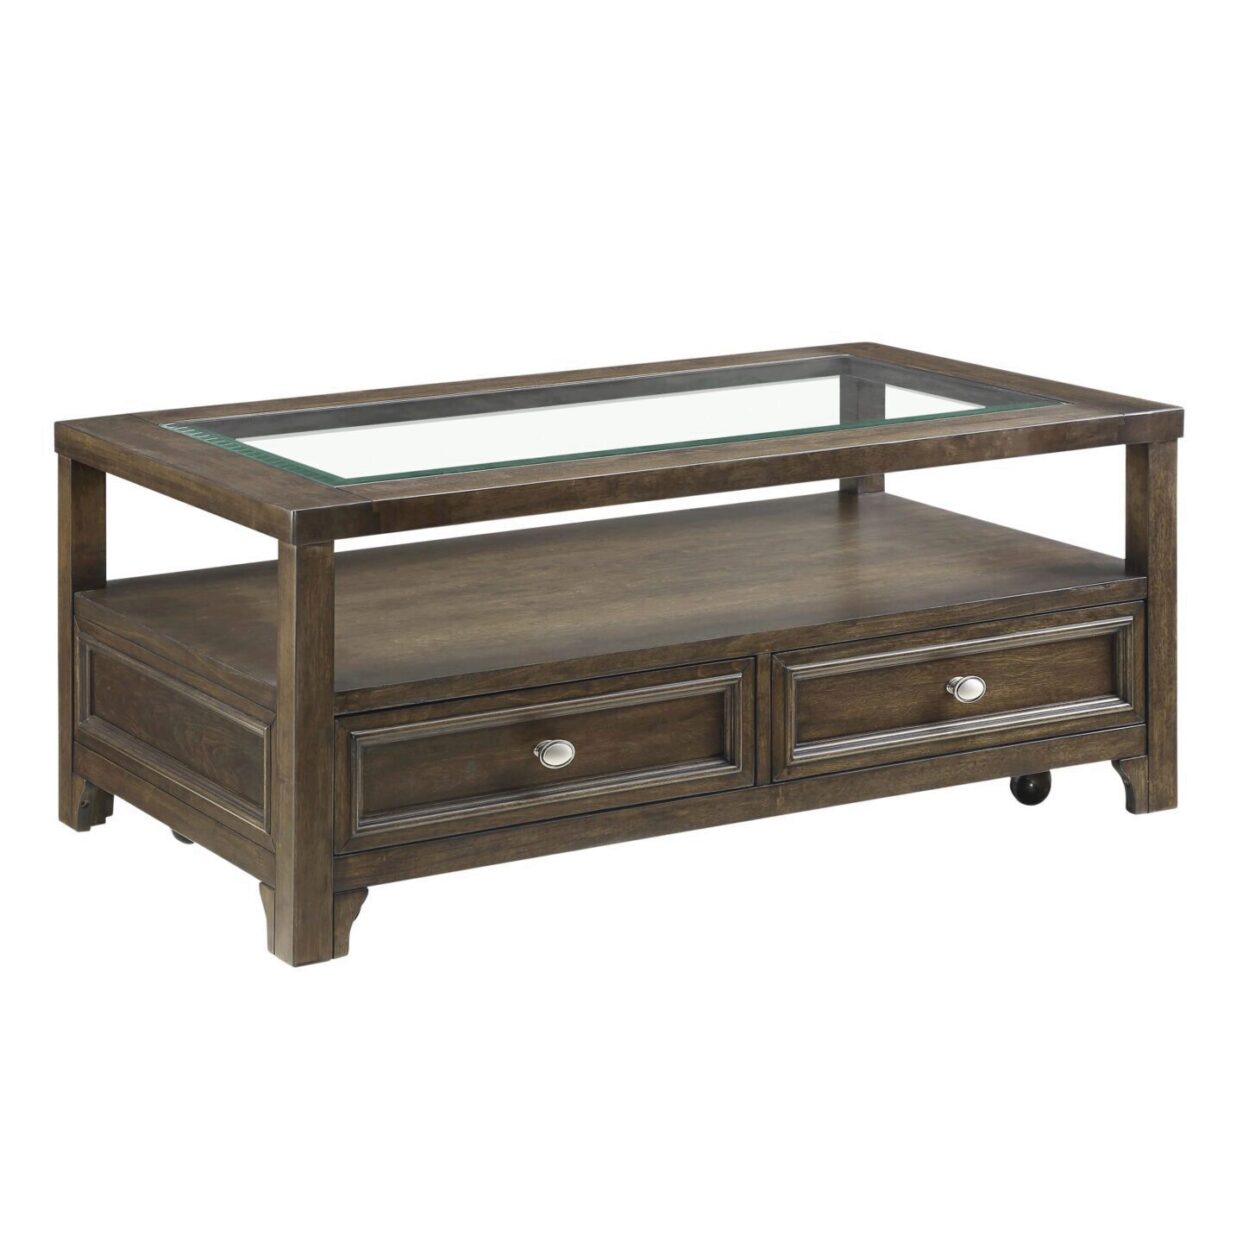 Auburn Transitional Charcoal Brown Wood Cocktail Table